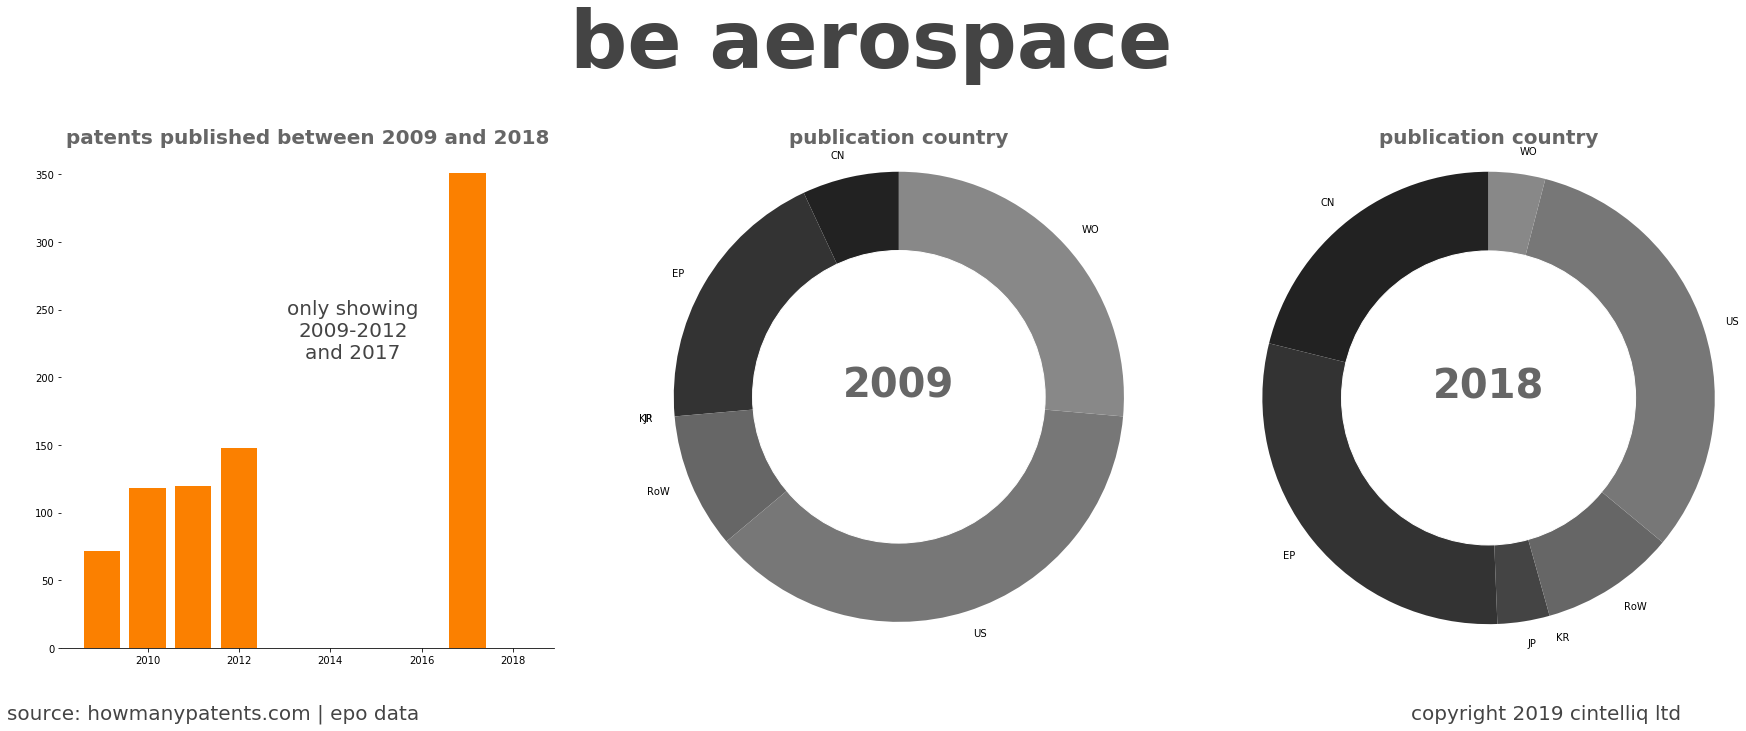 summary of patents for Be Aerospace